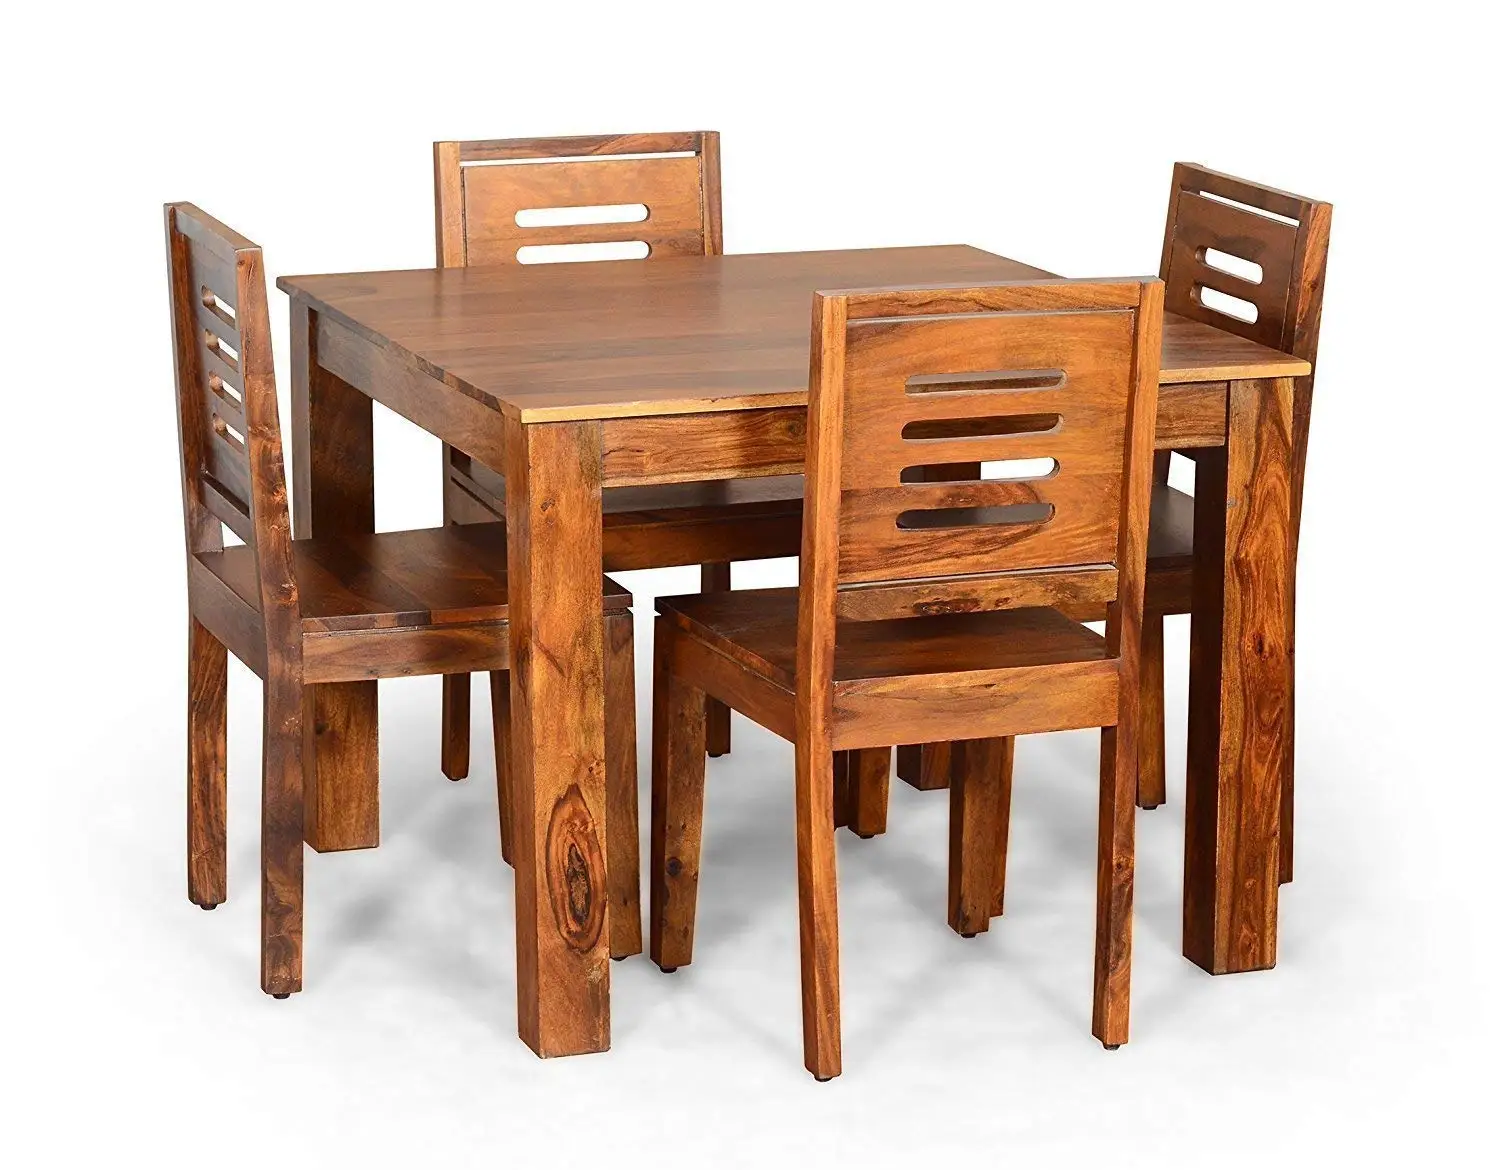 Sheesham Wood Dining Table Set With 4 Chairs For Living Room Buy